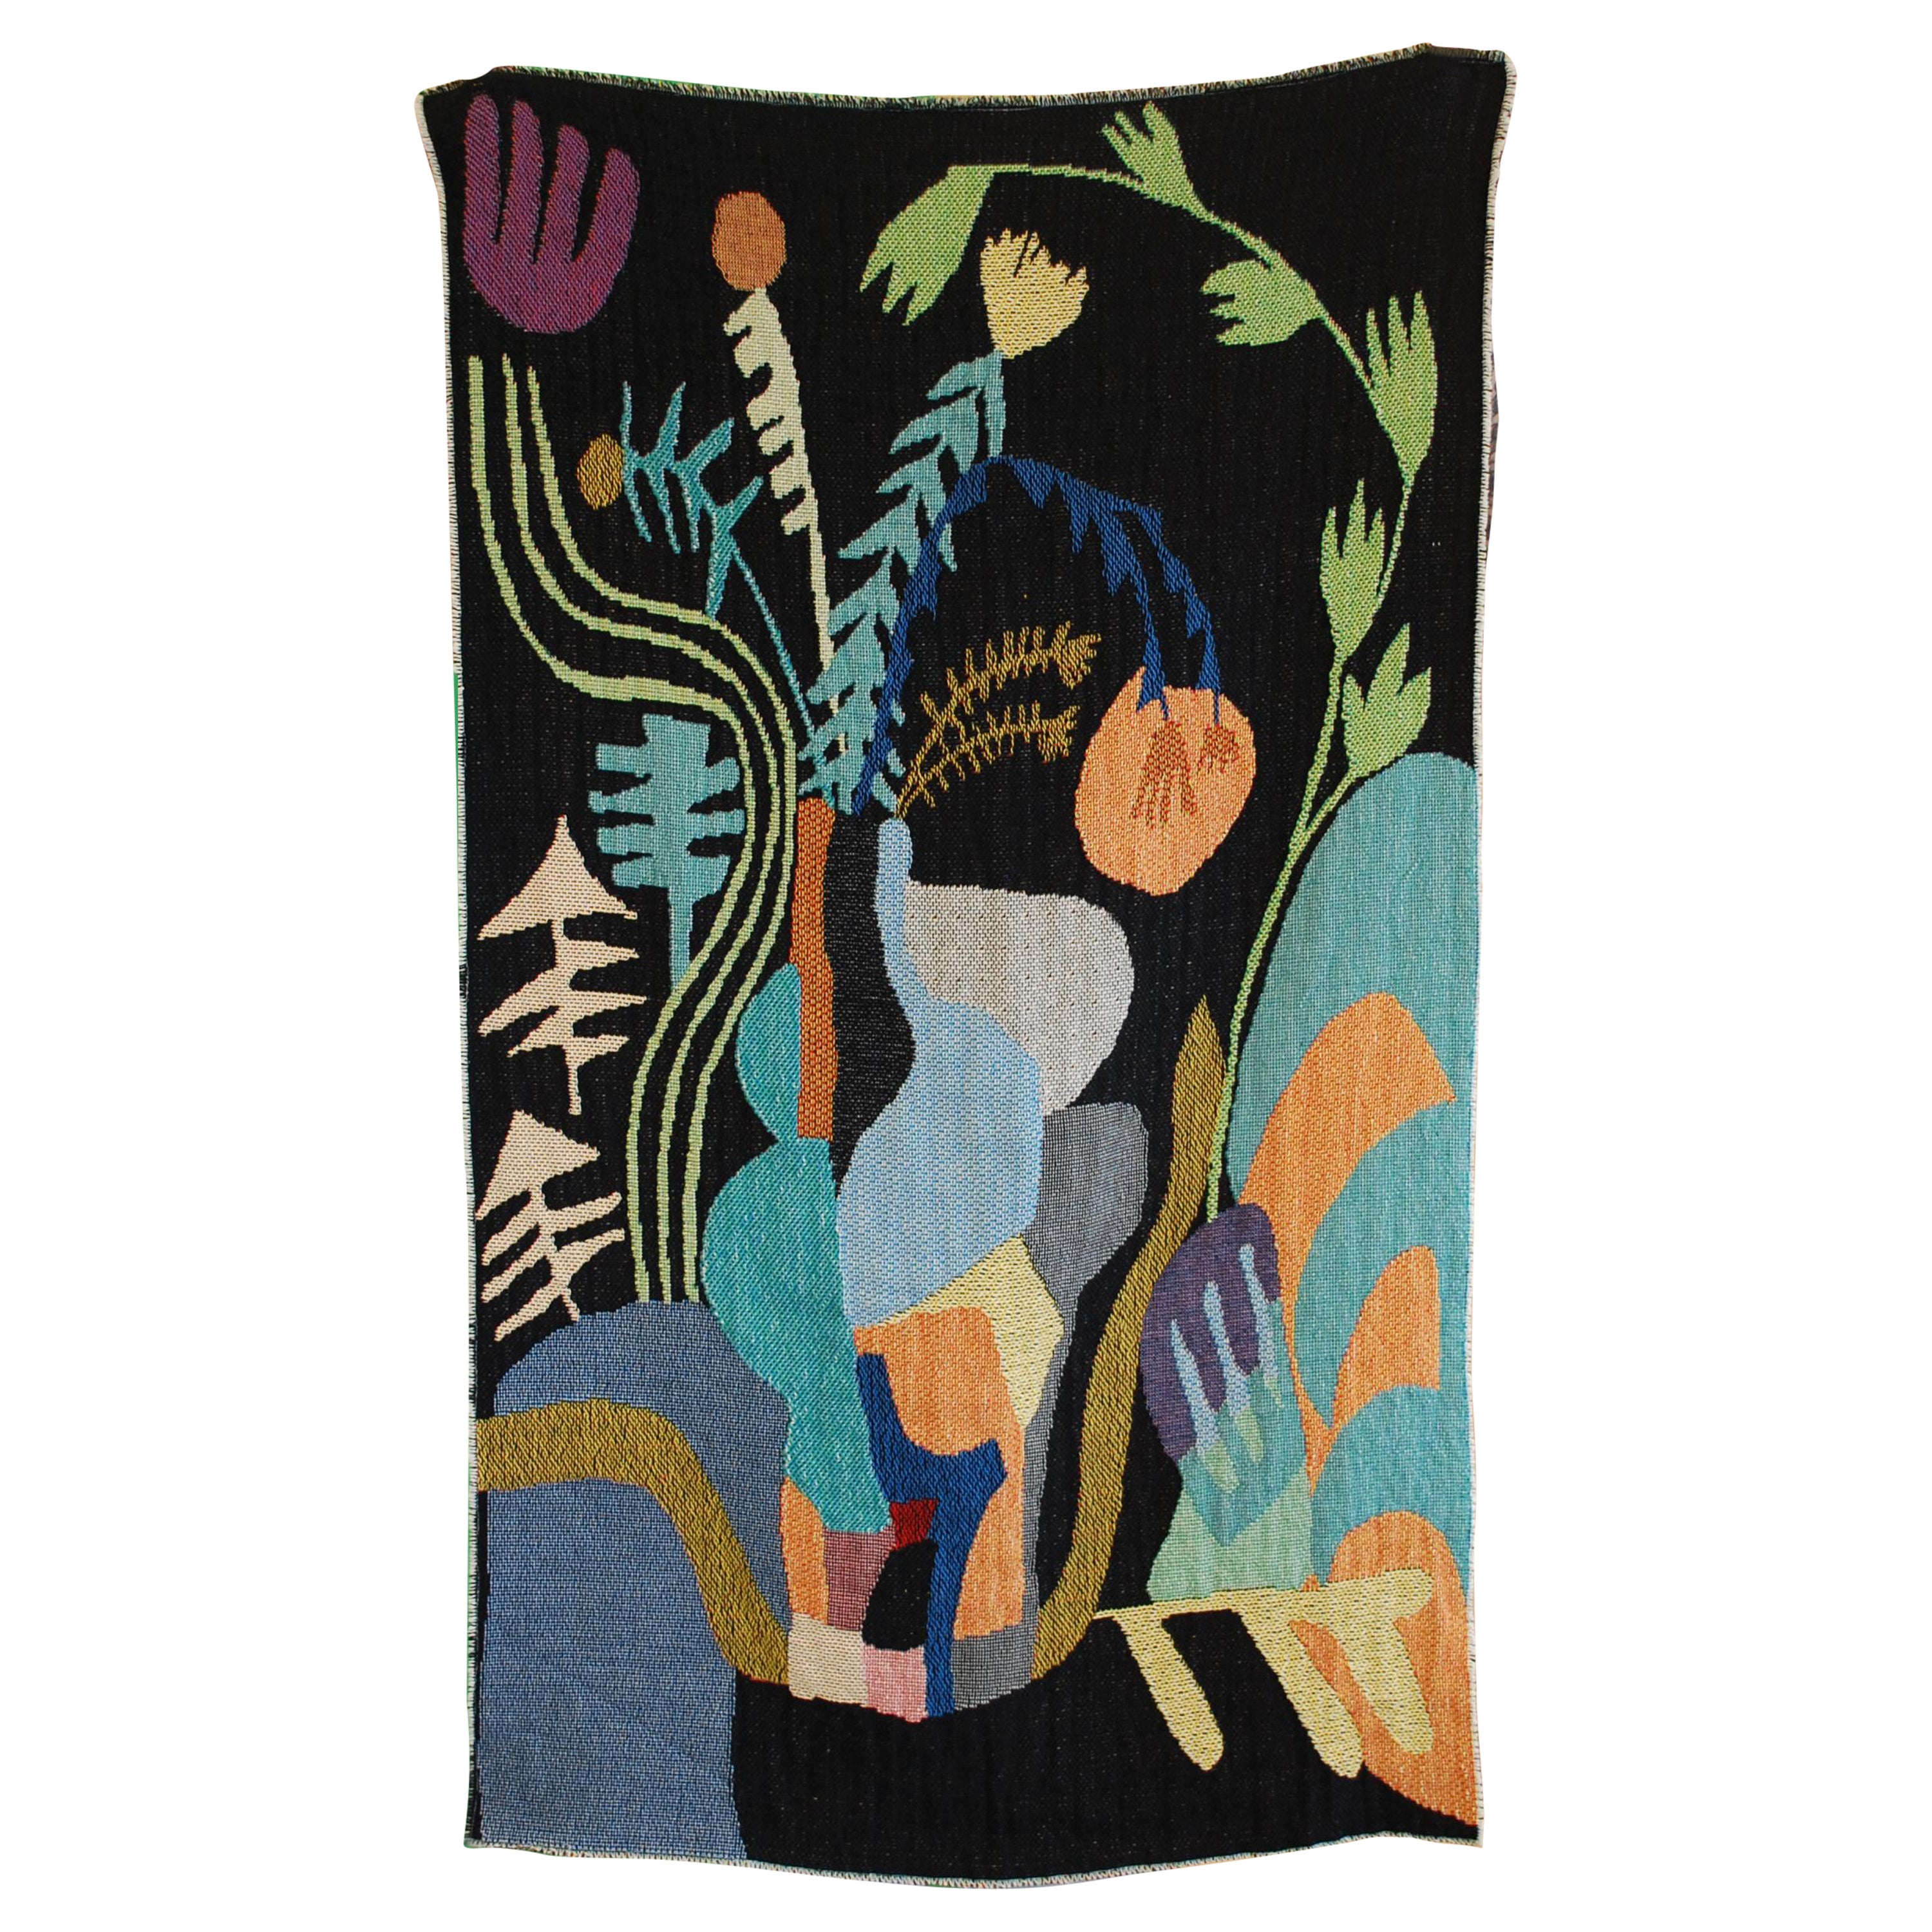 Abstract Arrangement in Vase Tapestry Tapestry Wall Hanging Woven Artwork